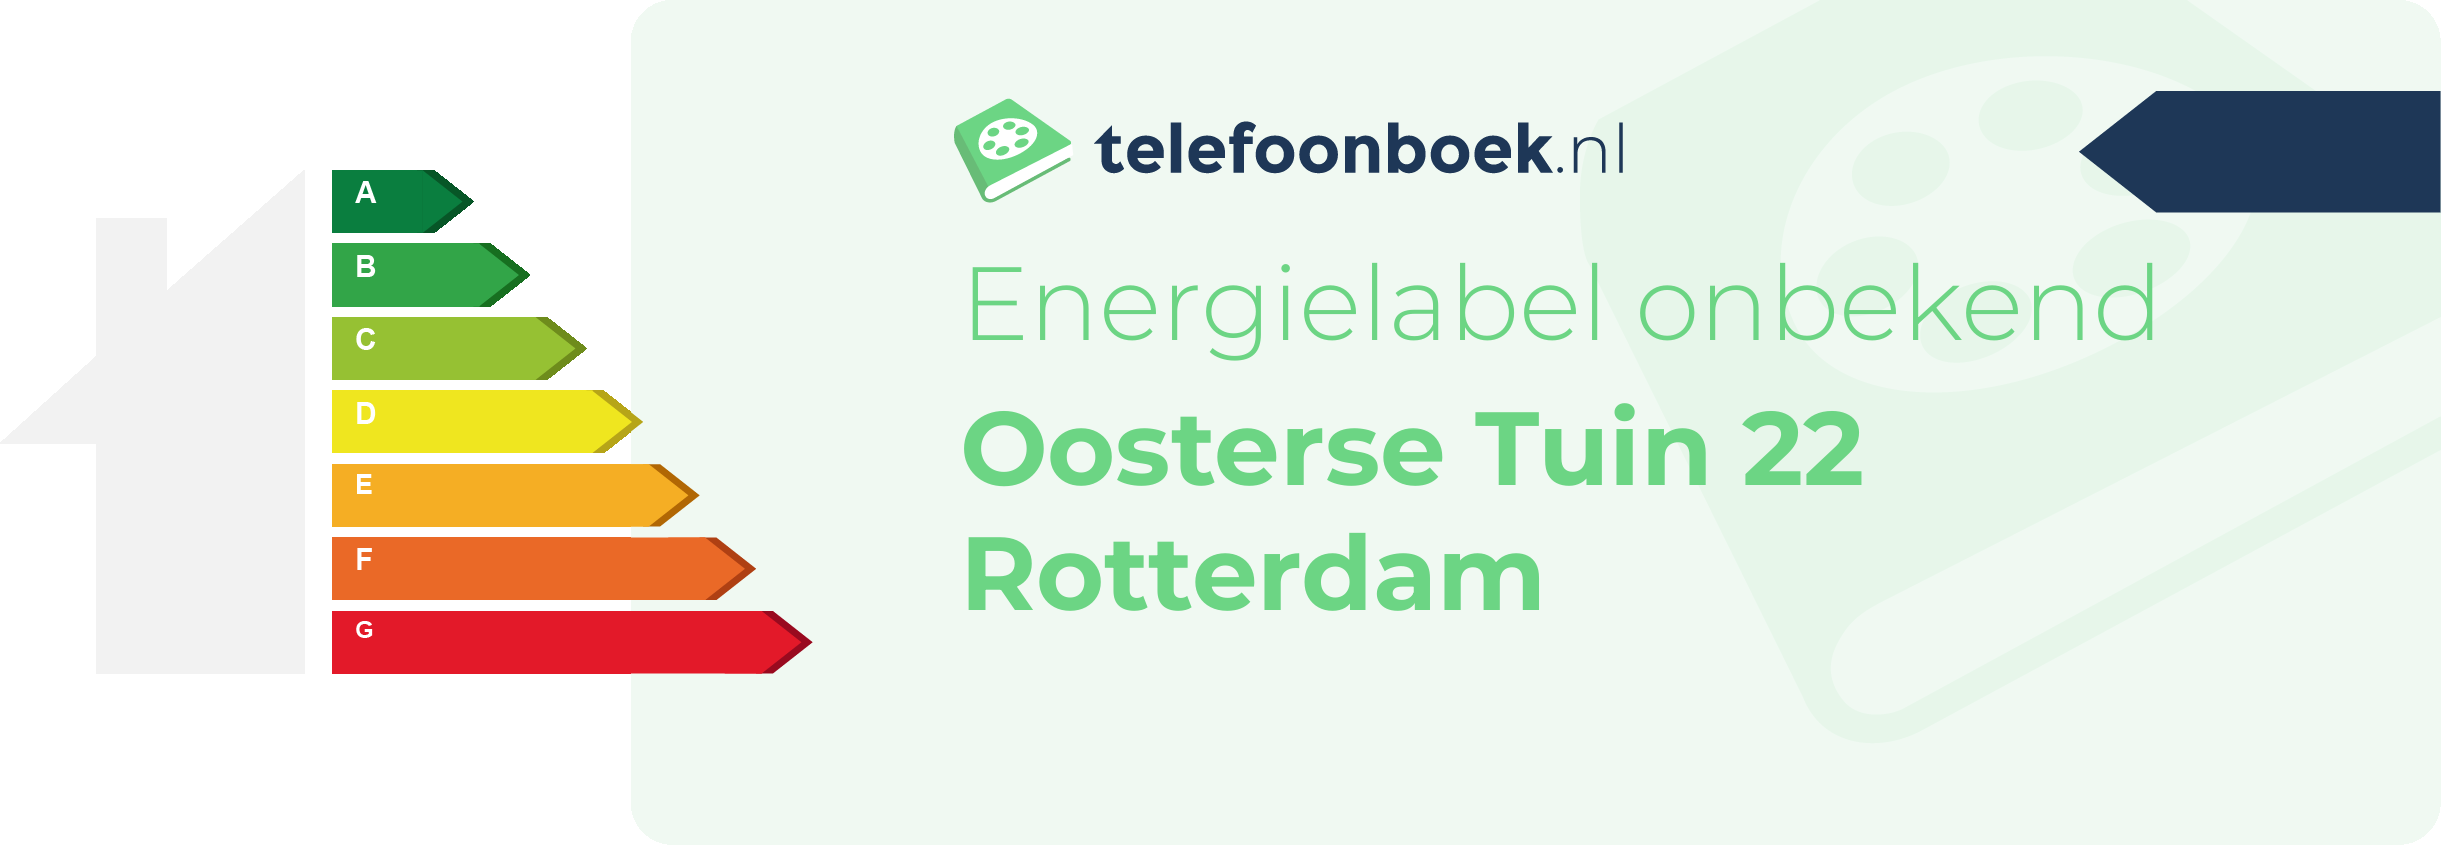 Energielabel Oosterse Tuin 22 Rotterdam